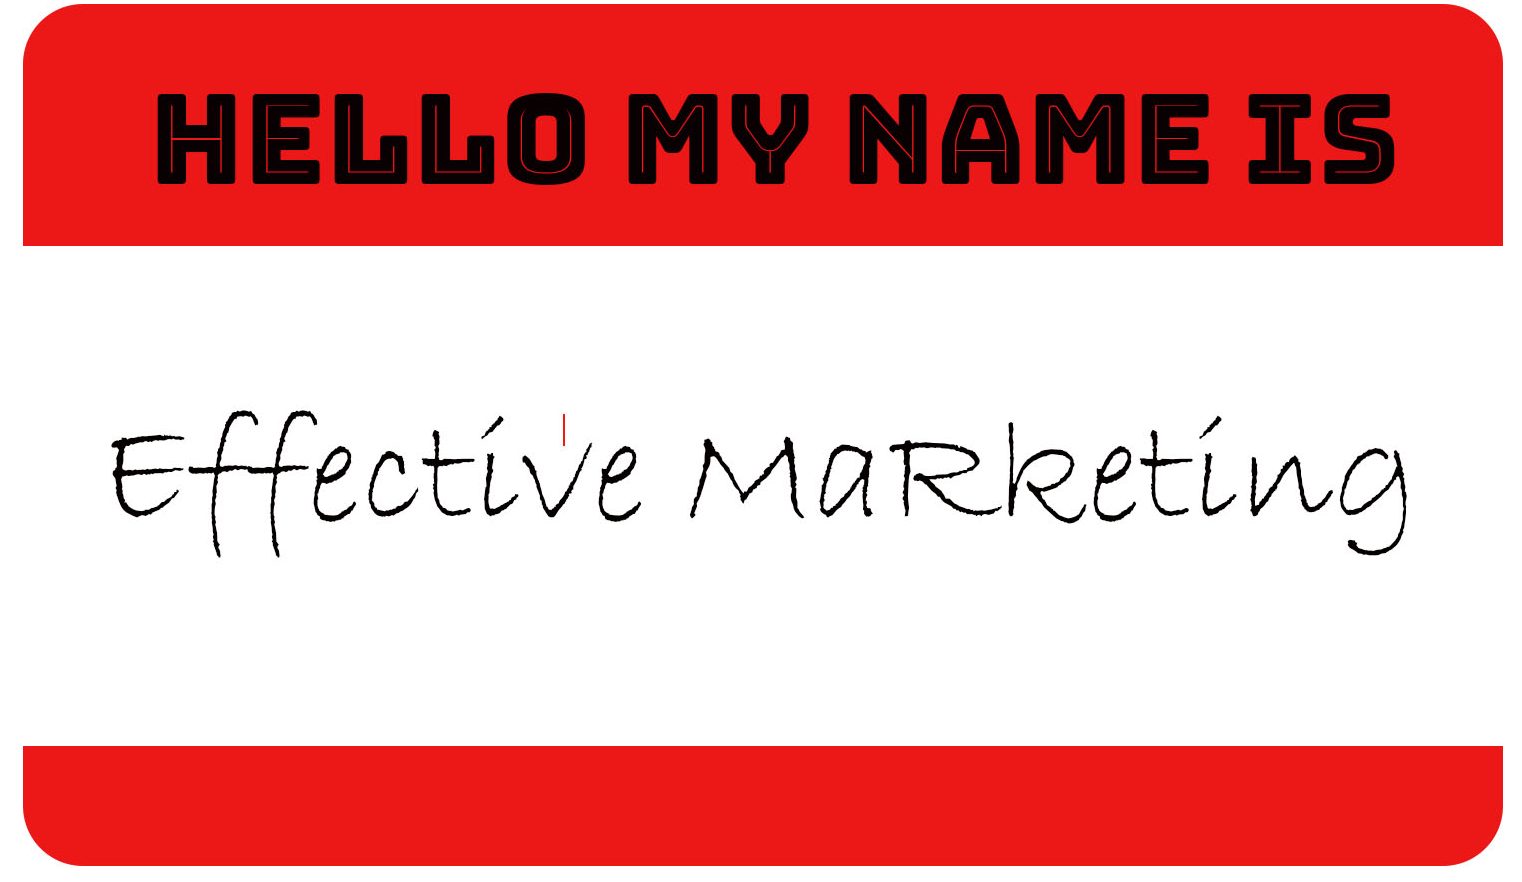 Simple Tips to Market More Effectively